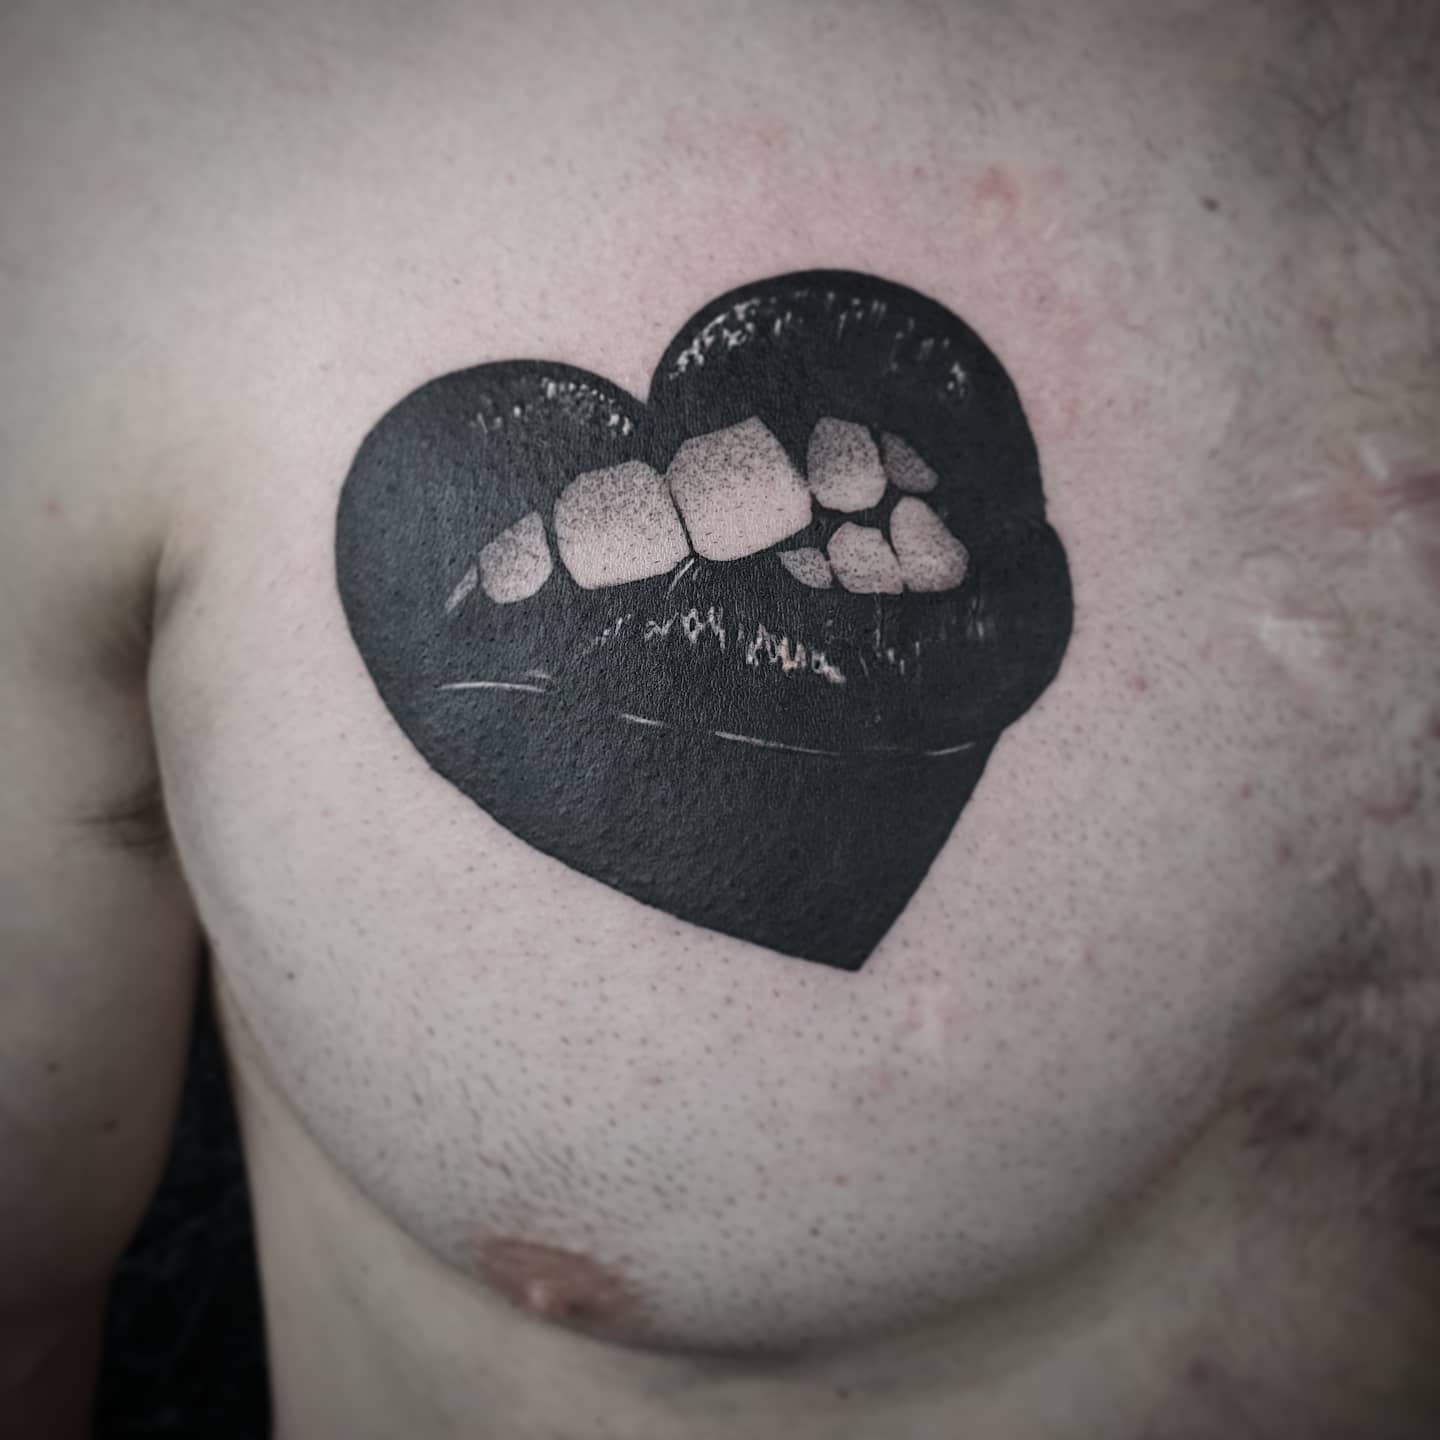 Lip Bite from today
One of my older flash pieces 🖤
_____________________________
                             